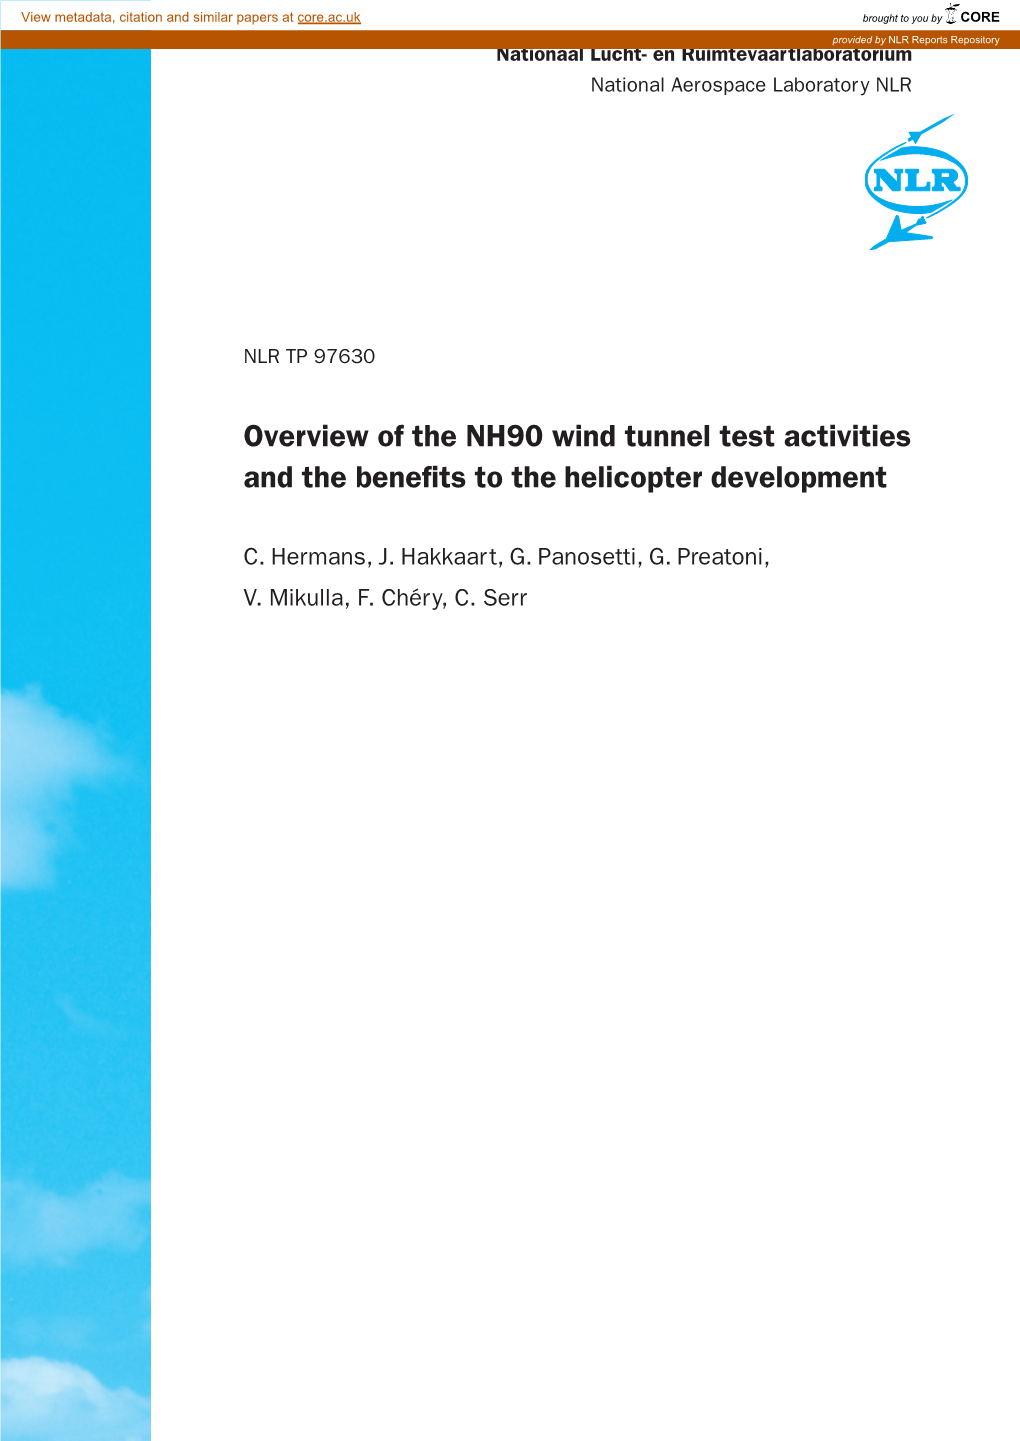 Overview of the NH90 Wind Tunnel Test Activities and the Benefits to the Helicopter Development